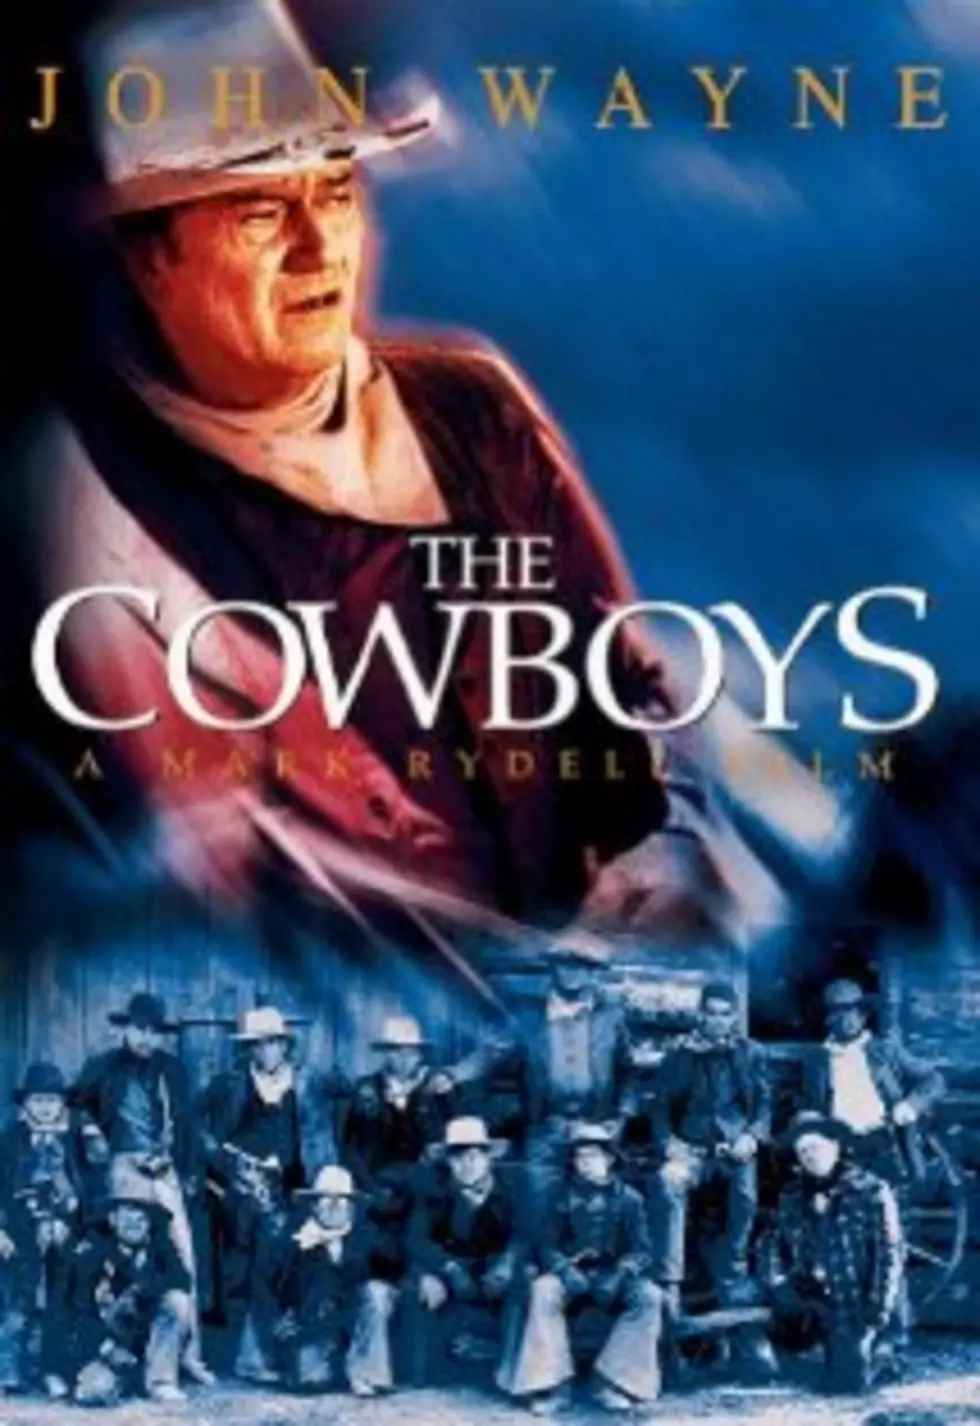 This Week’s FREE Friday Night Downtown Movie Is “The Cowboys”